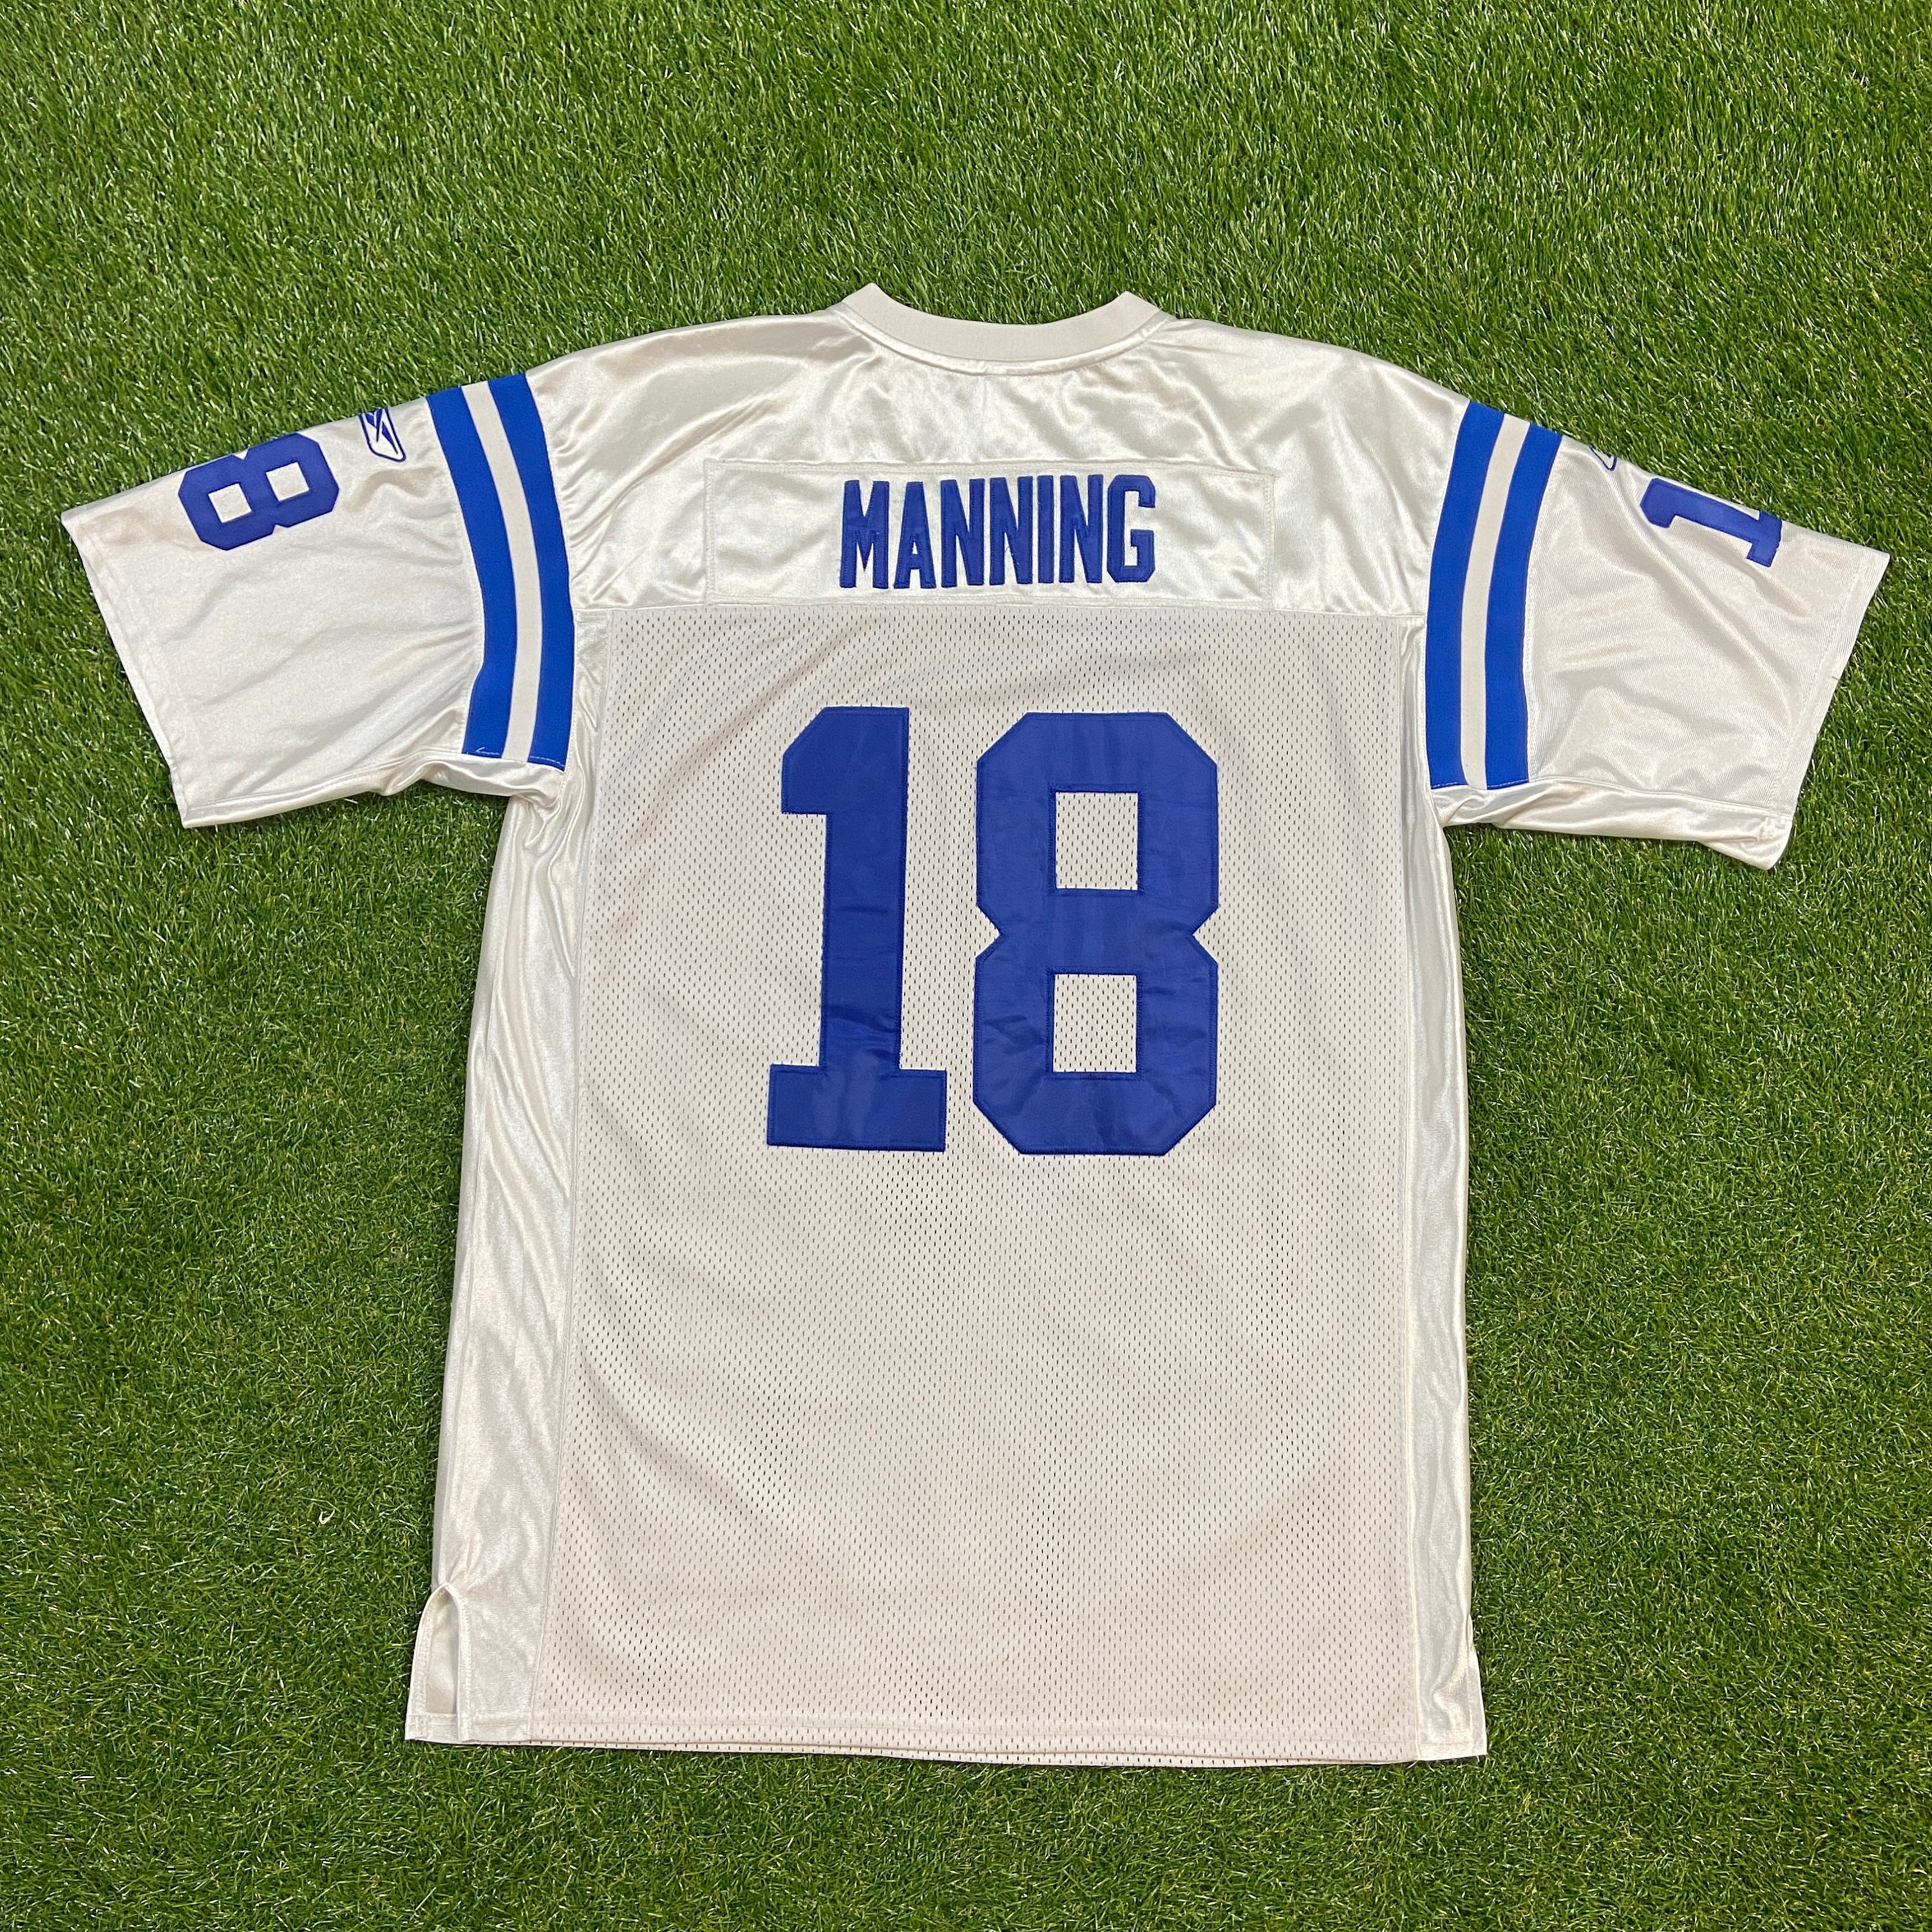 Vintage Indianapolis Colts Peyton Manning #18 Jersey Reebok Size 54 NFL Football Indiana 1990s 00S Super Bowl Patch Authentic